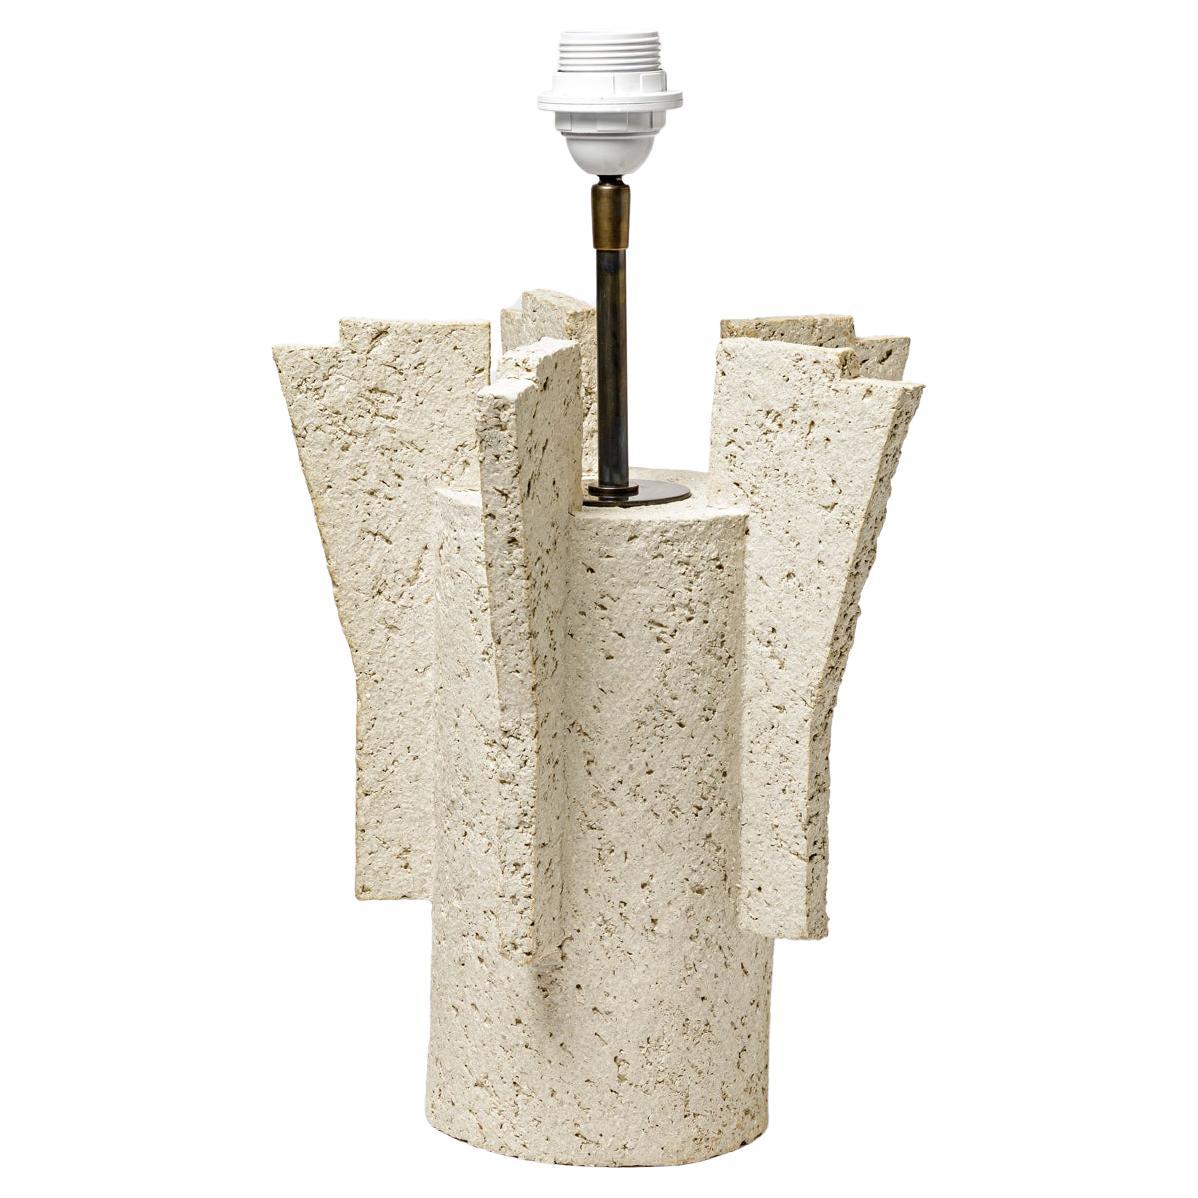 Table lamp in beige grog clay by Denis Castaing, 2019